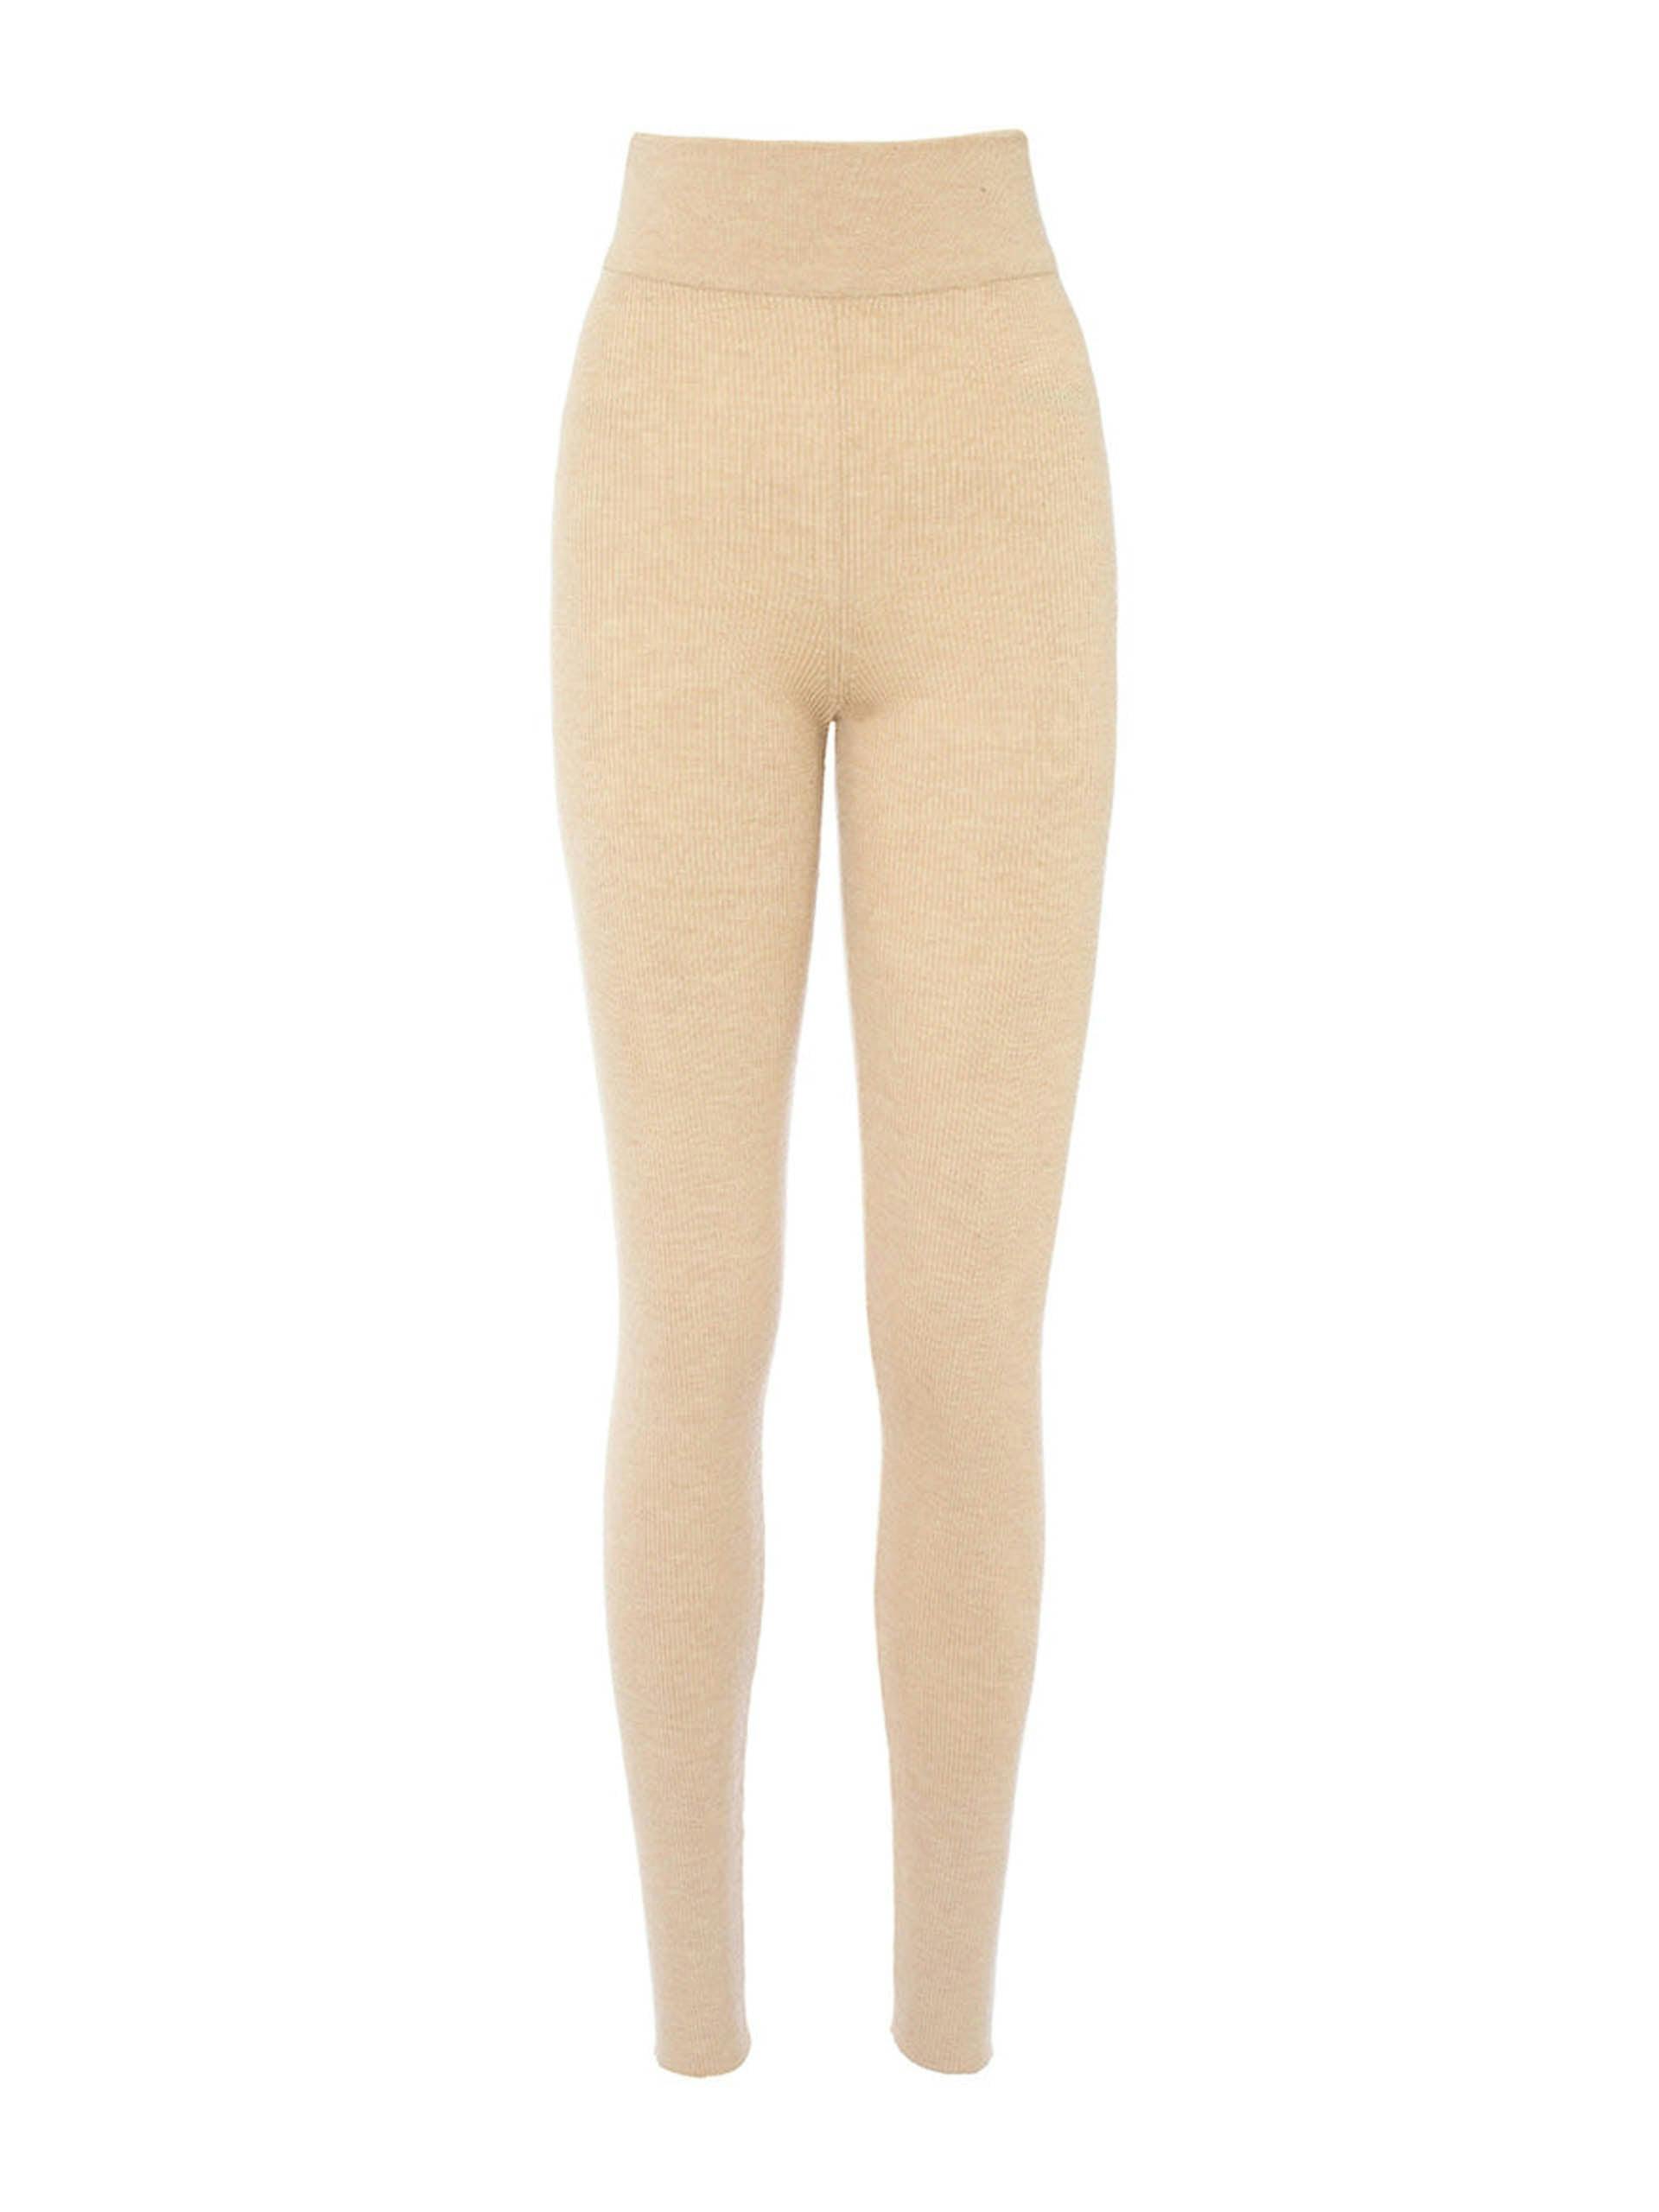 Cashmere knitted leggings